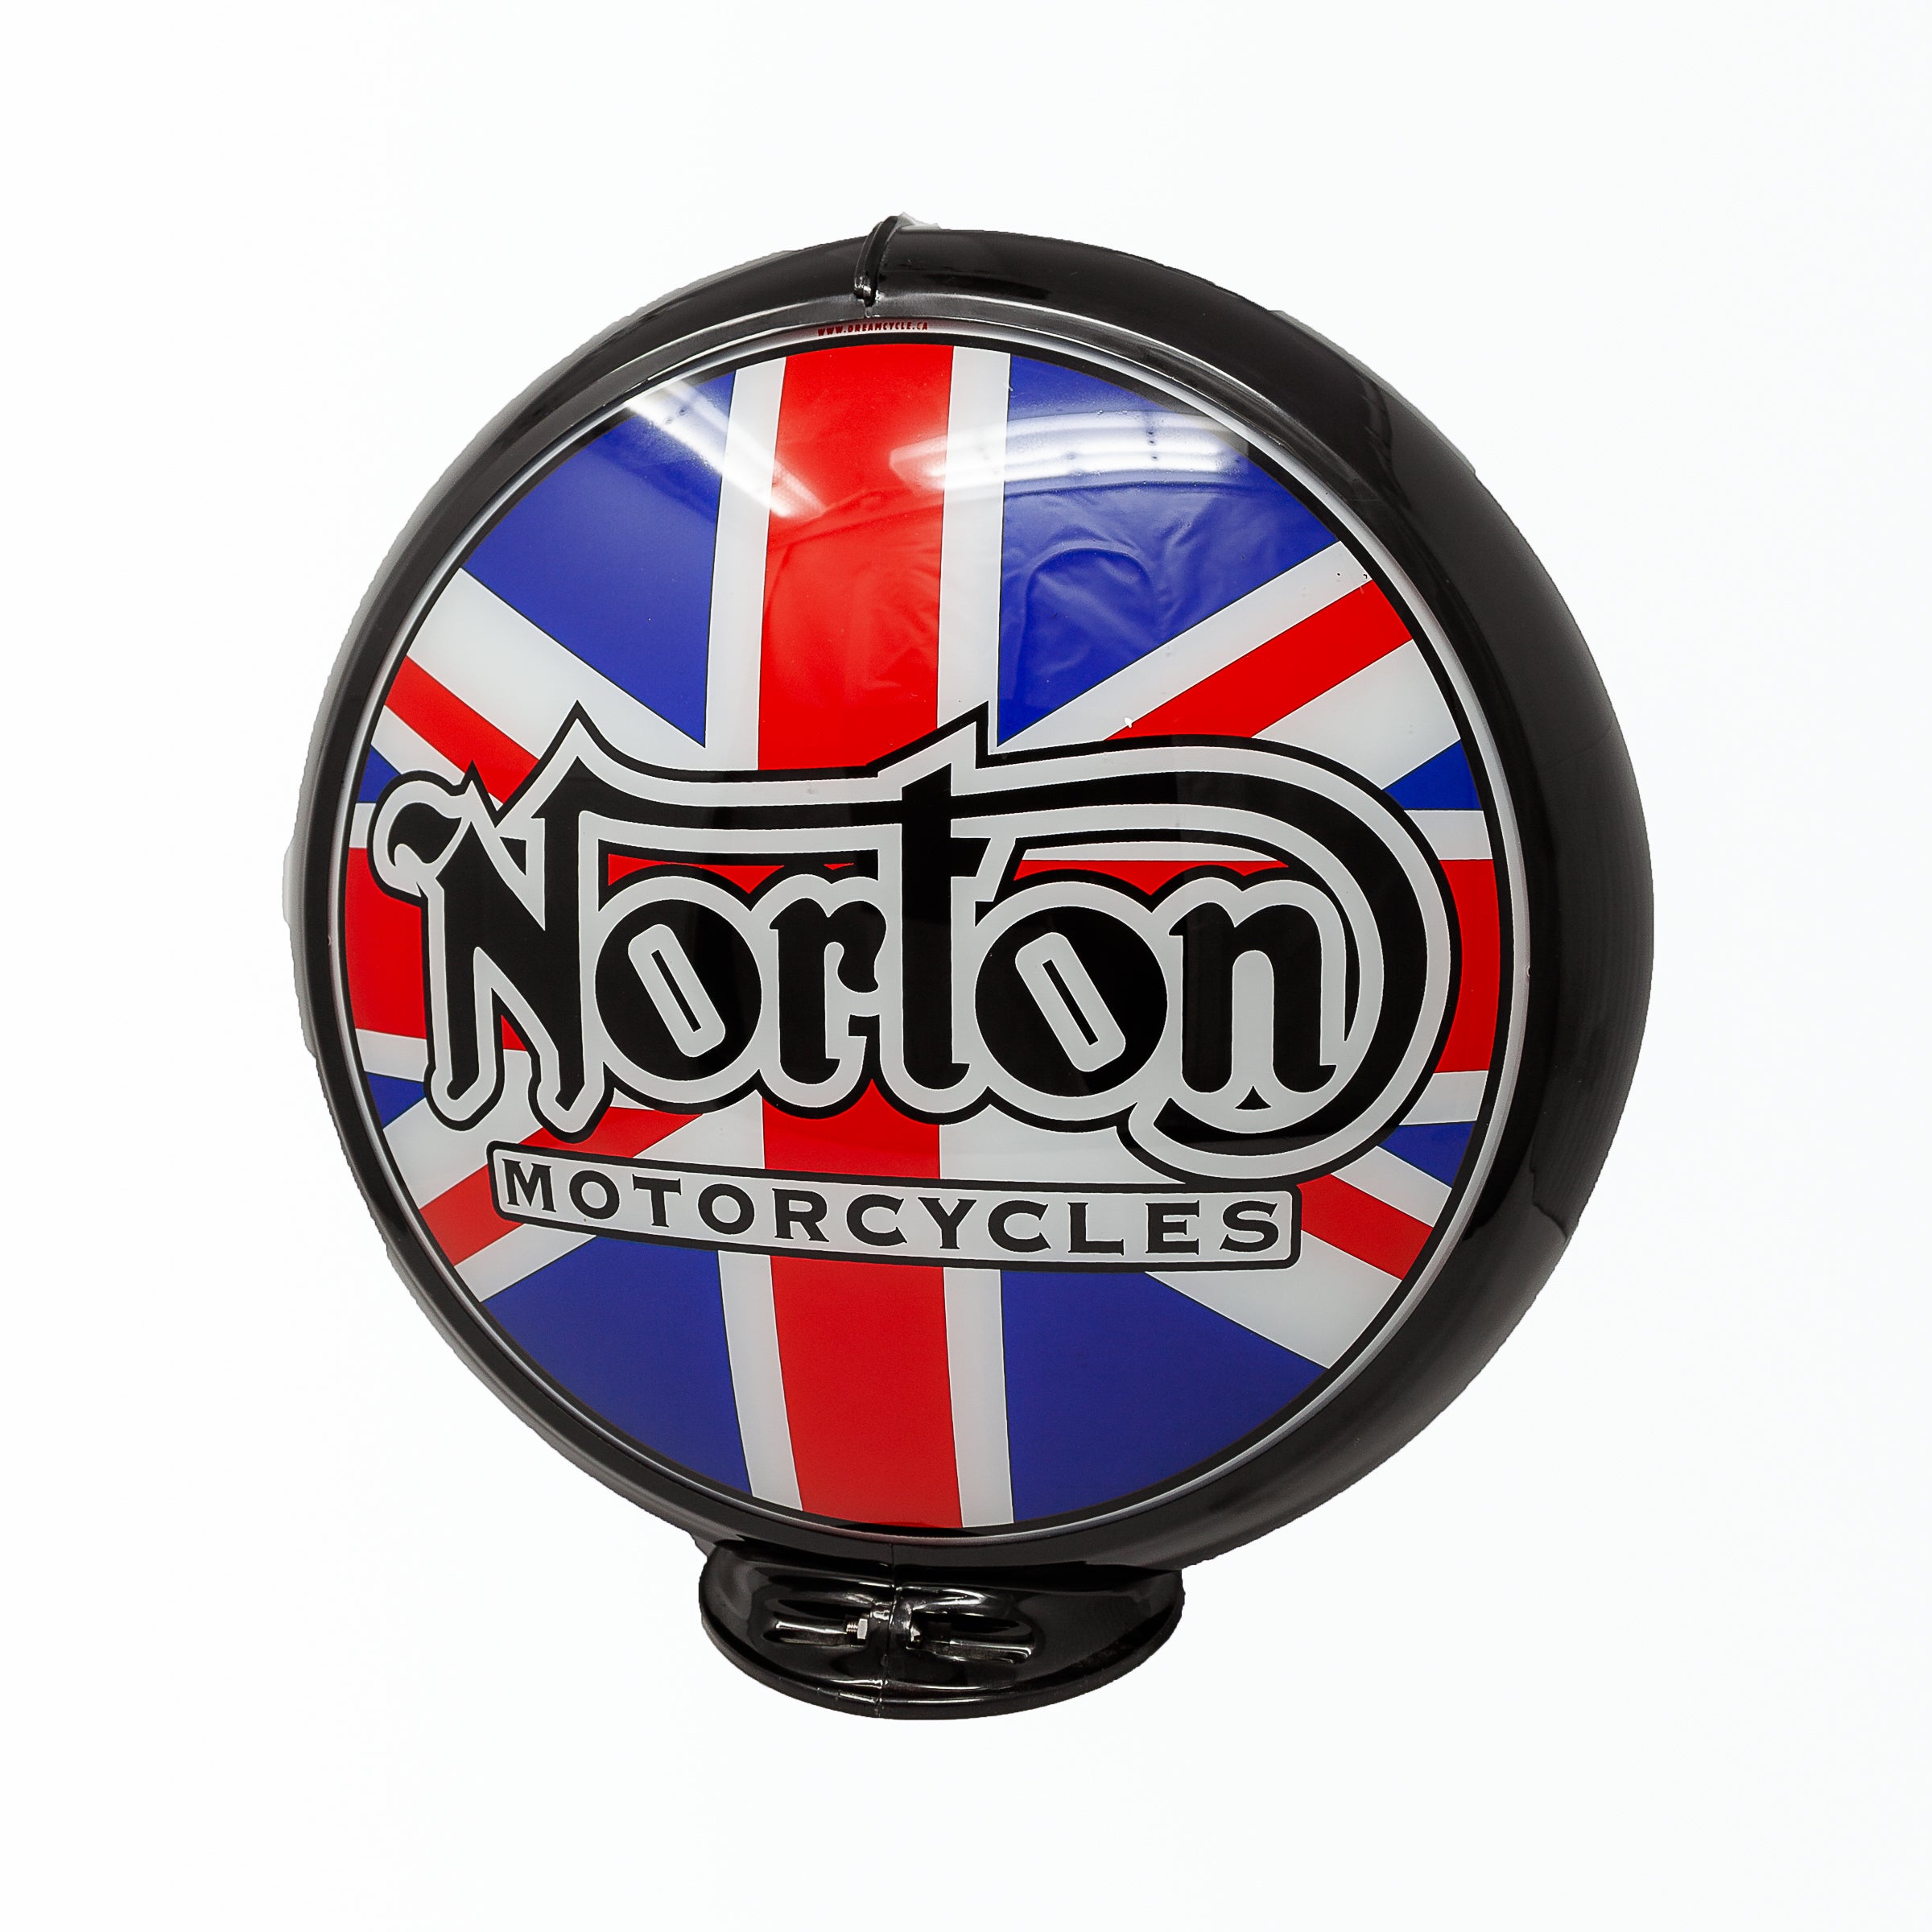 Dreamcycle Motorcycle Museum |  Norton Motorcycles Globe on white background.